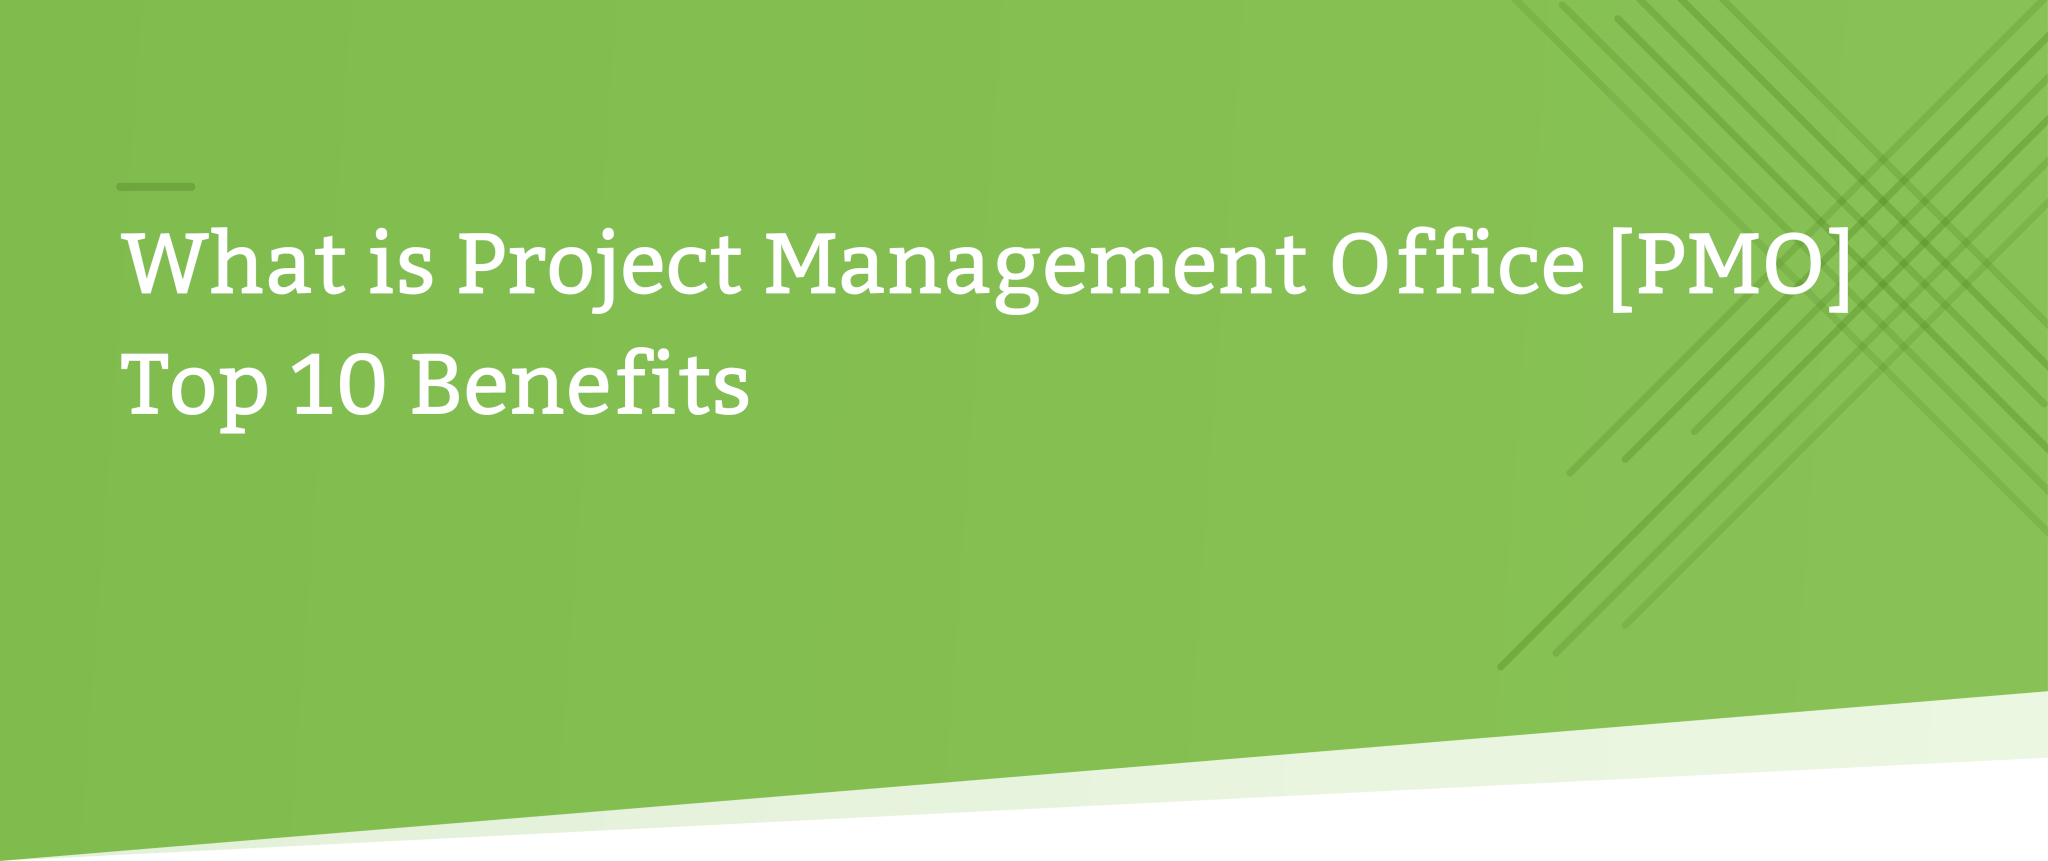 What is project management office PMO header image